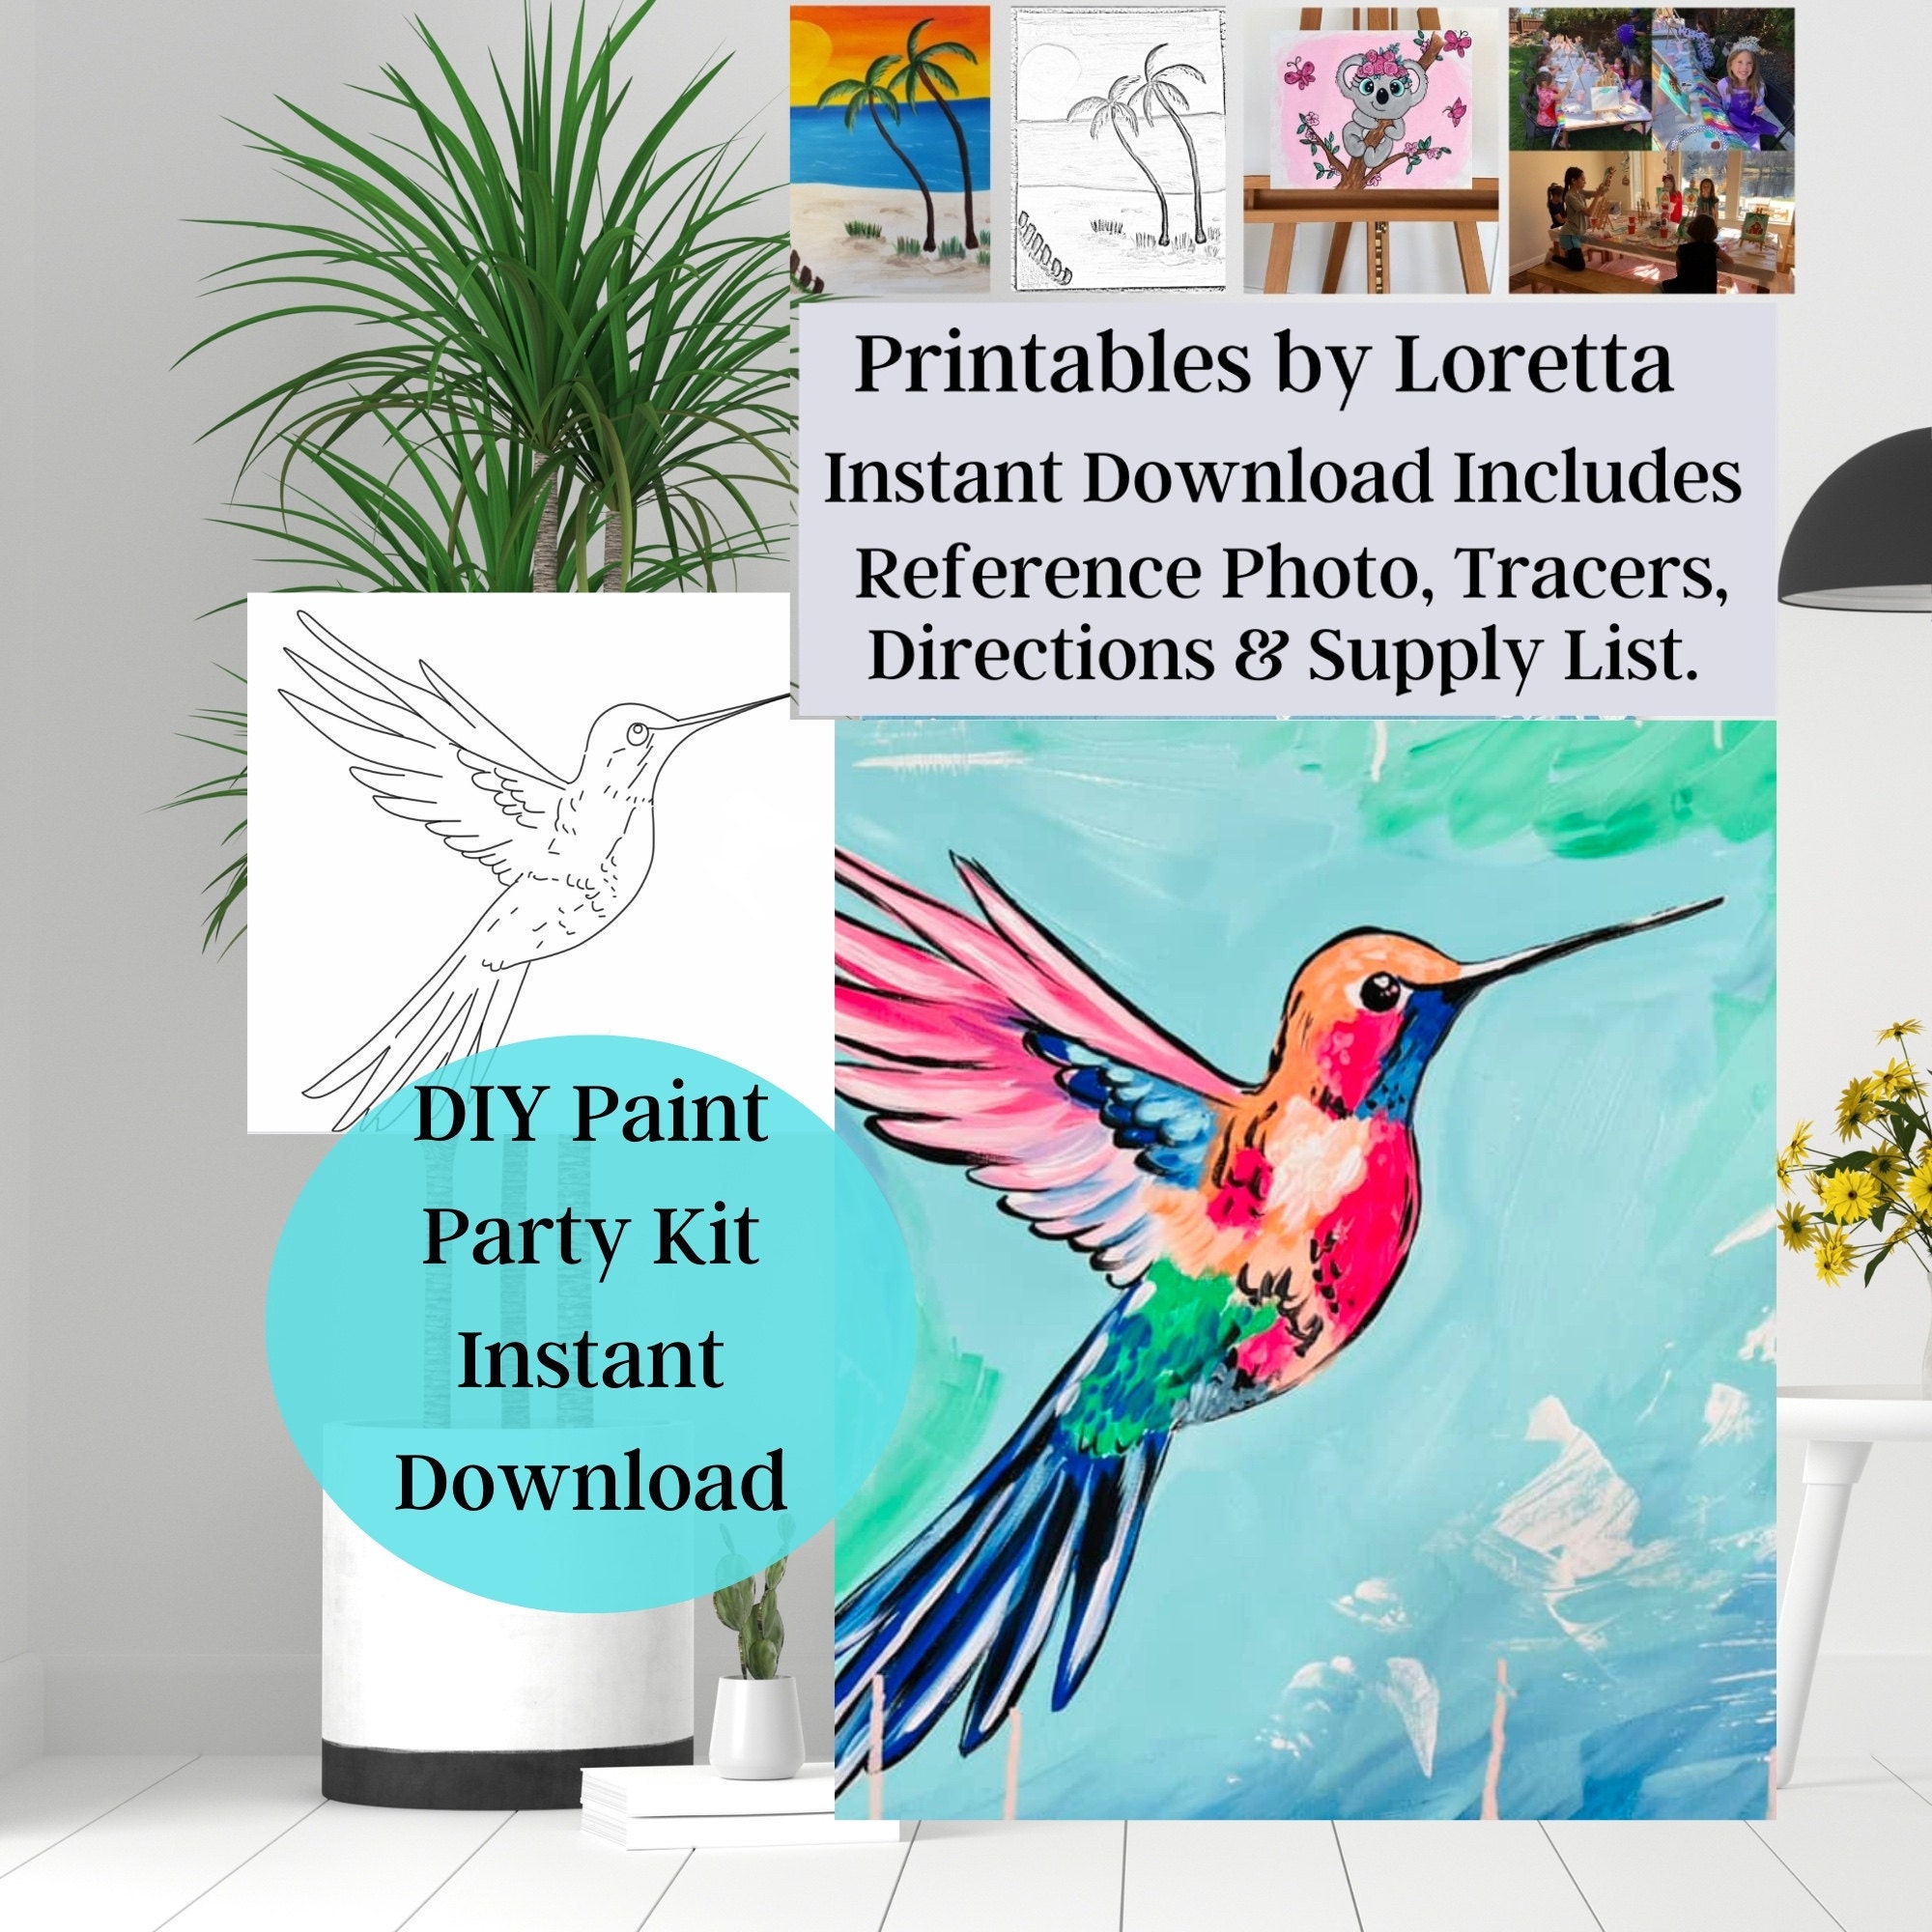 Christmas Highlander Art Party Kit! At Home Paint Party Supplies! Begi –  Teresa's Spot for All Things Art